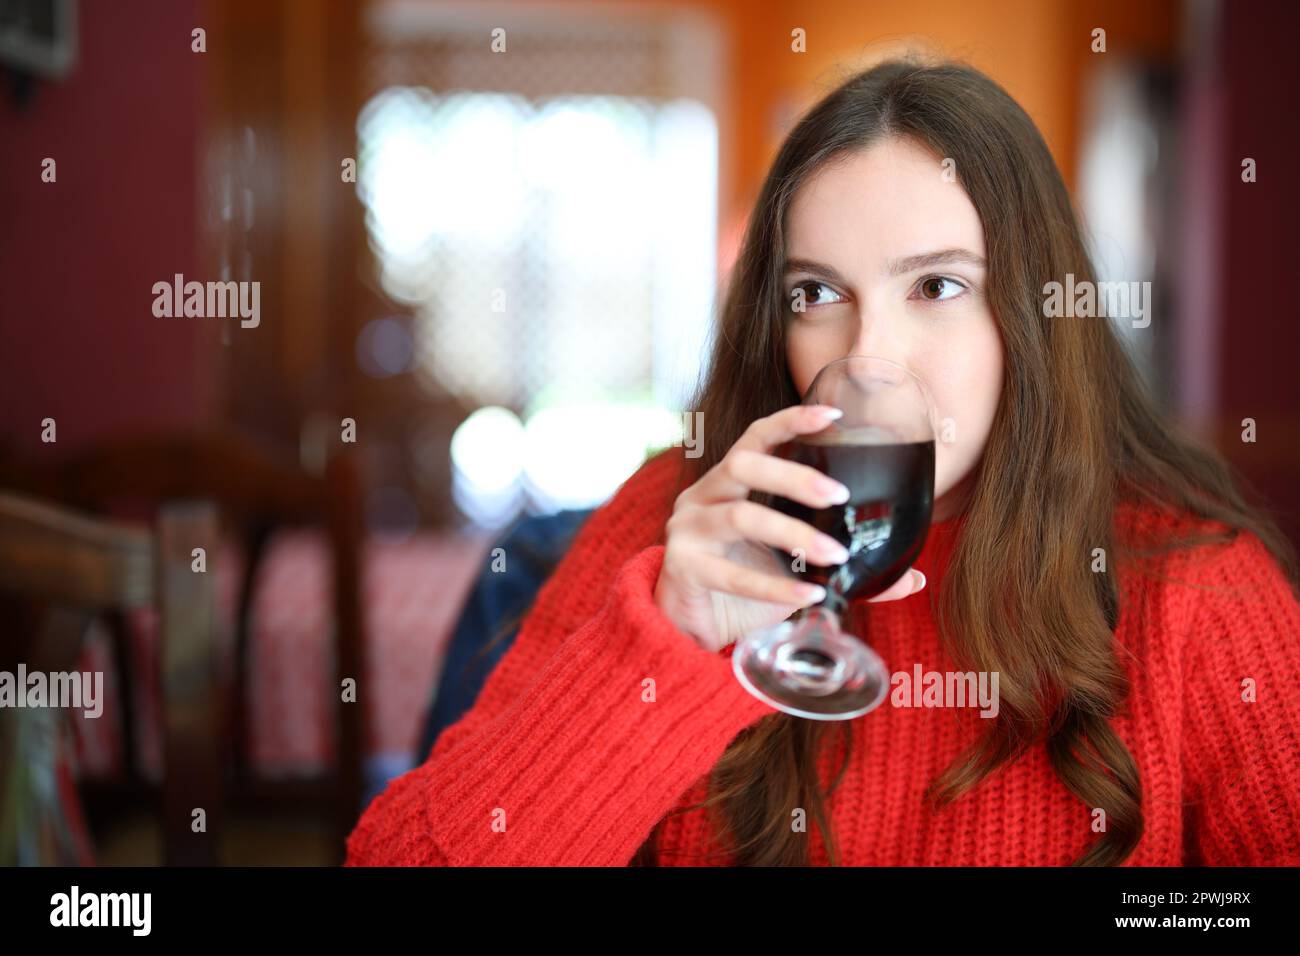 Woman in red sweater drinking soda sitting in a bar Stock Photo